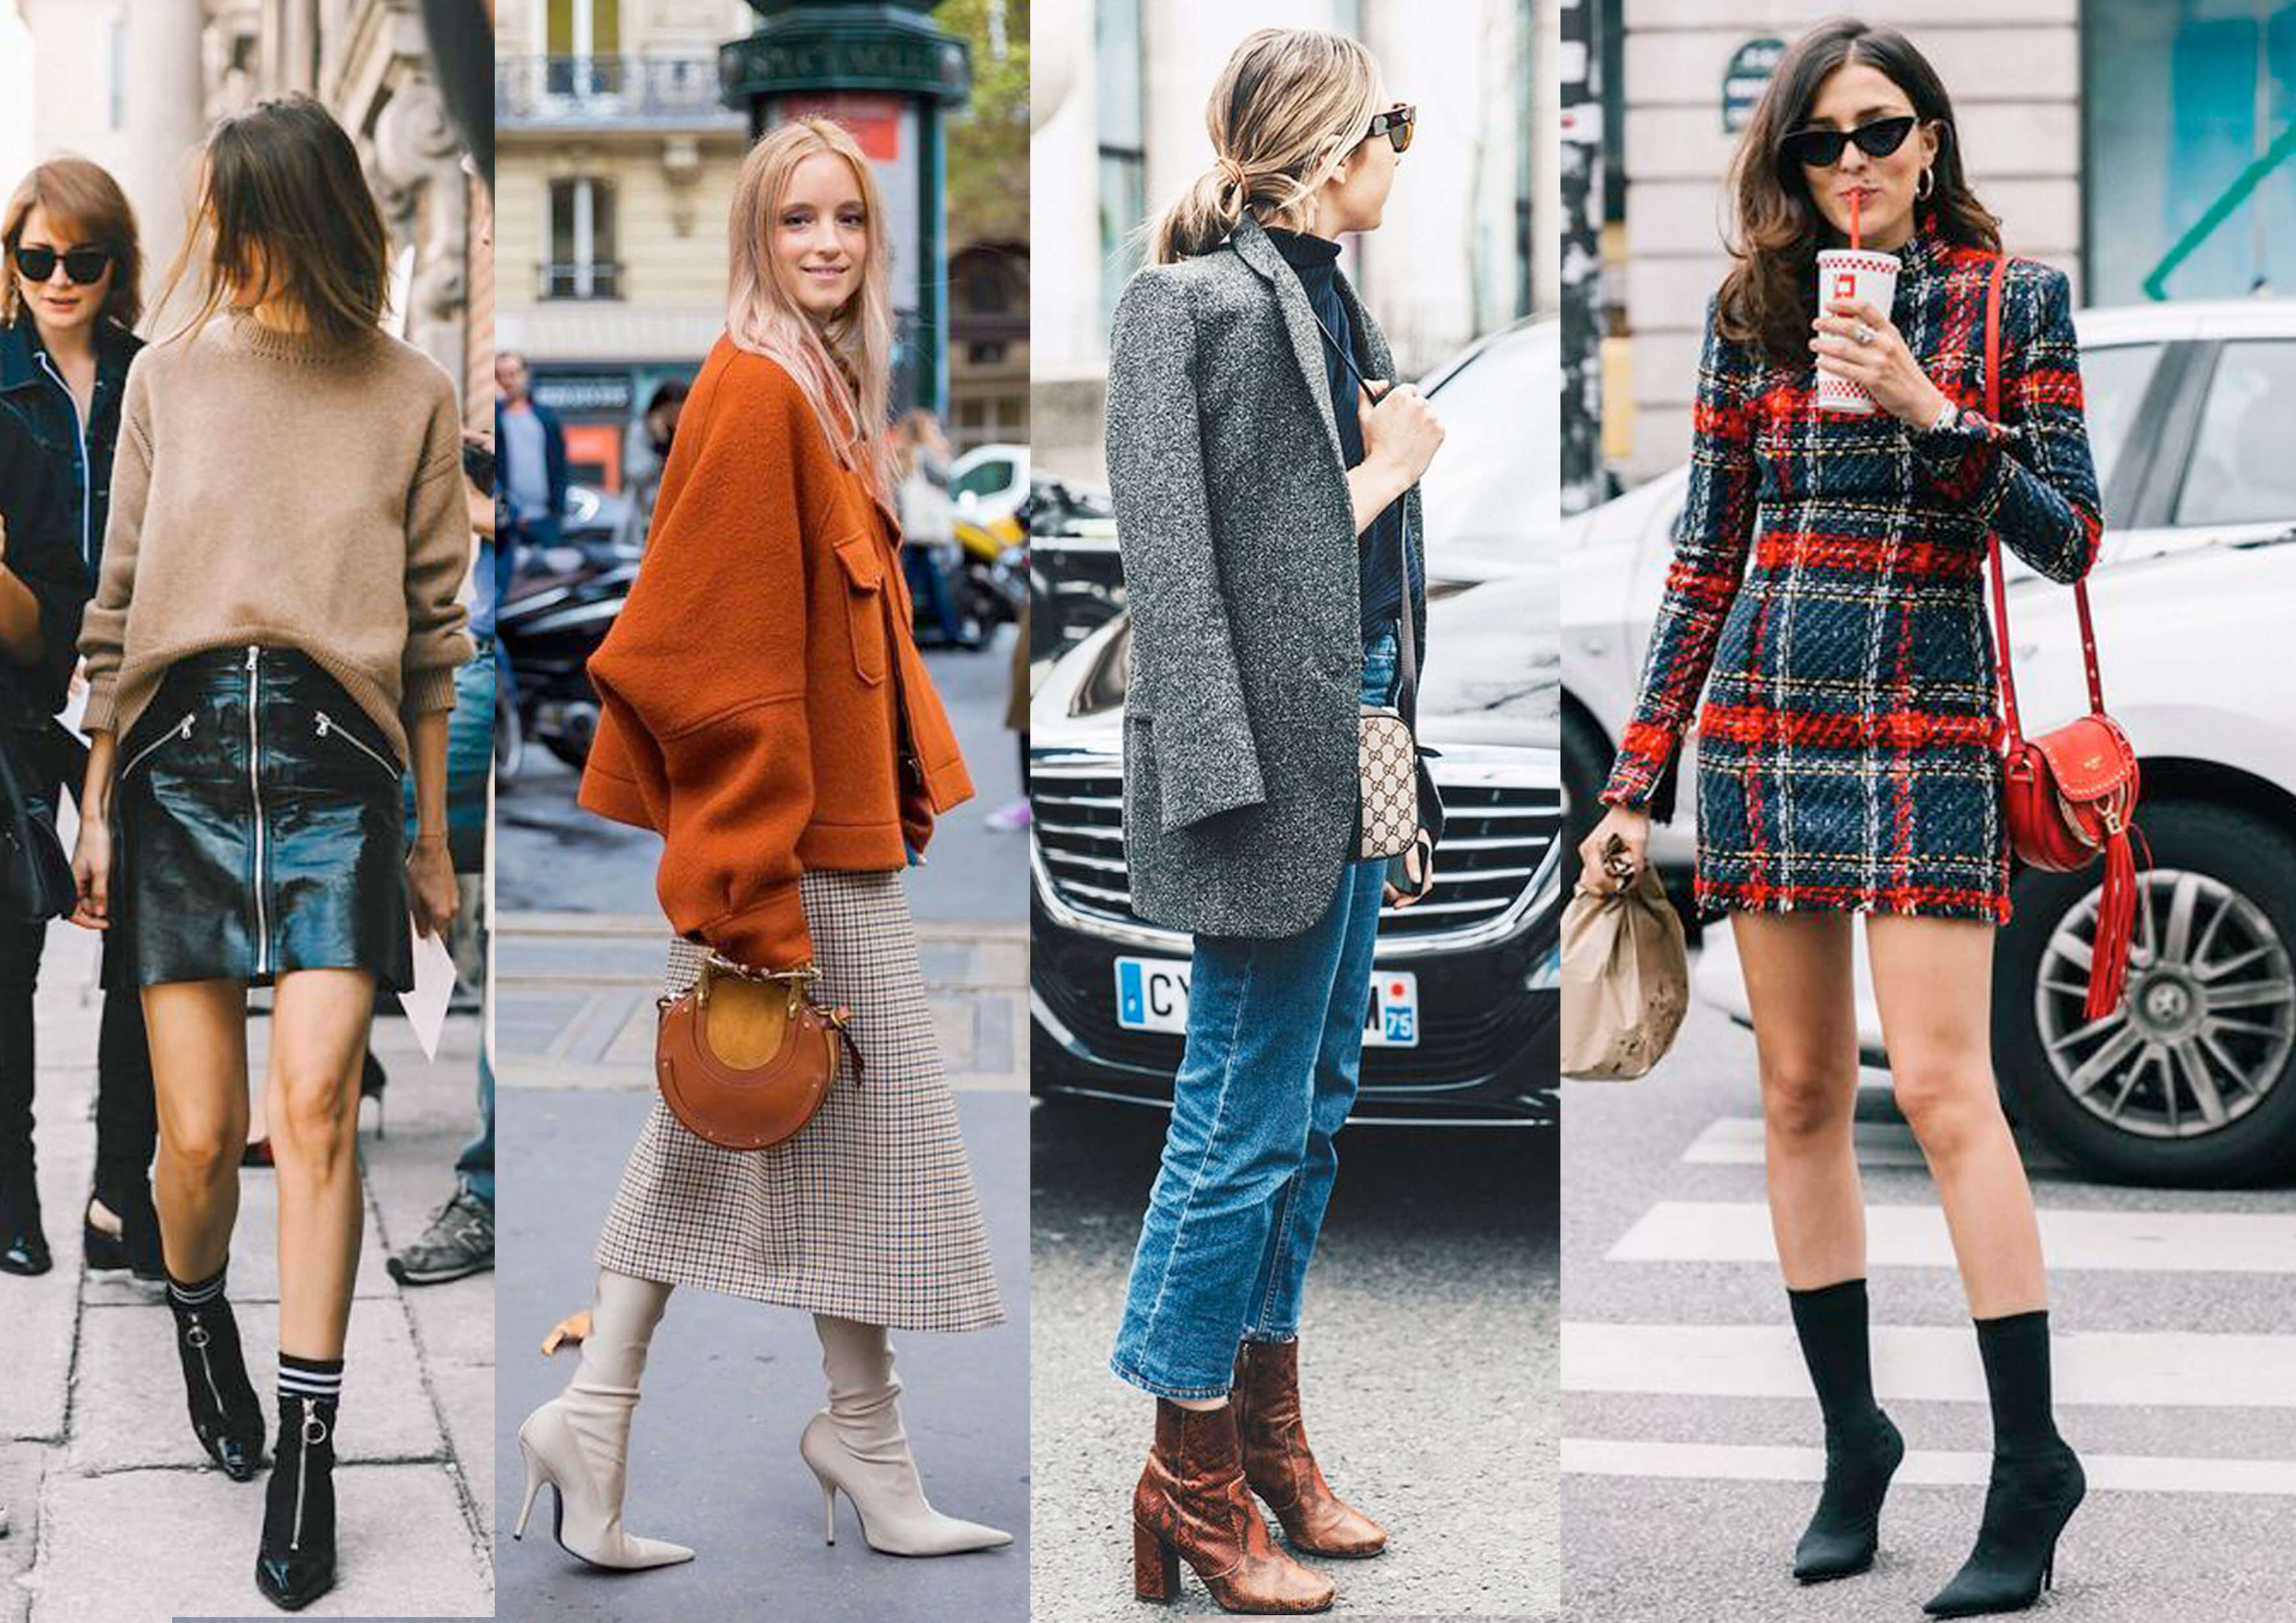 5 things that will stay fashionable